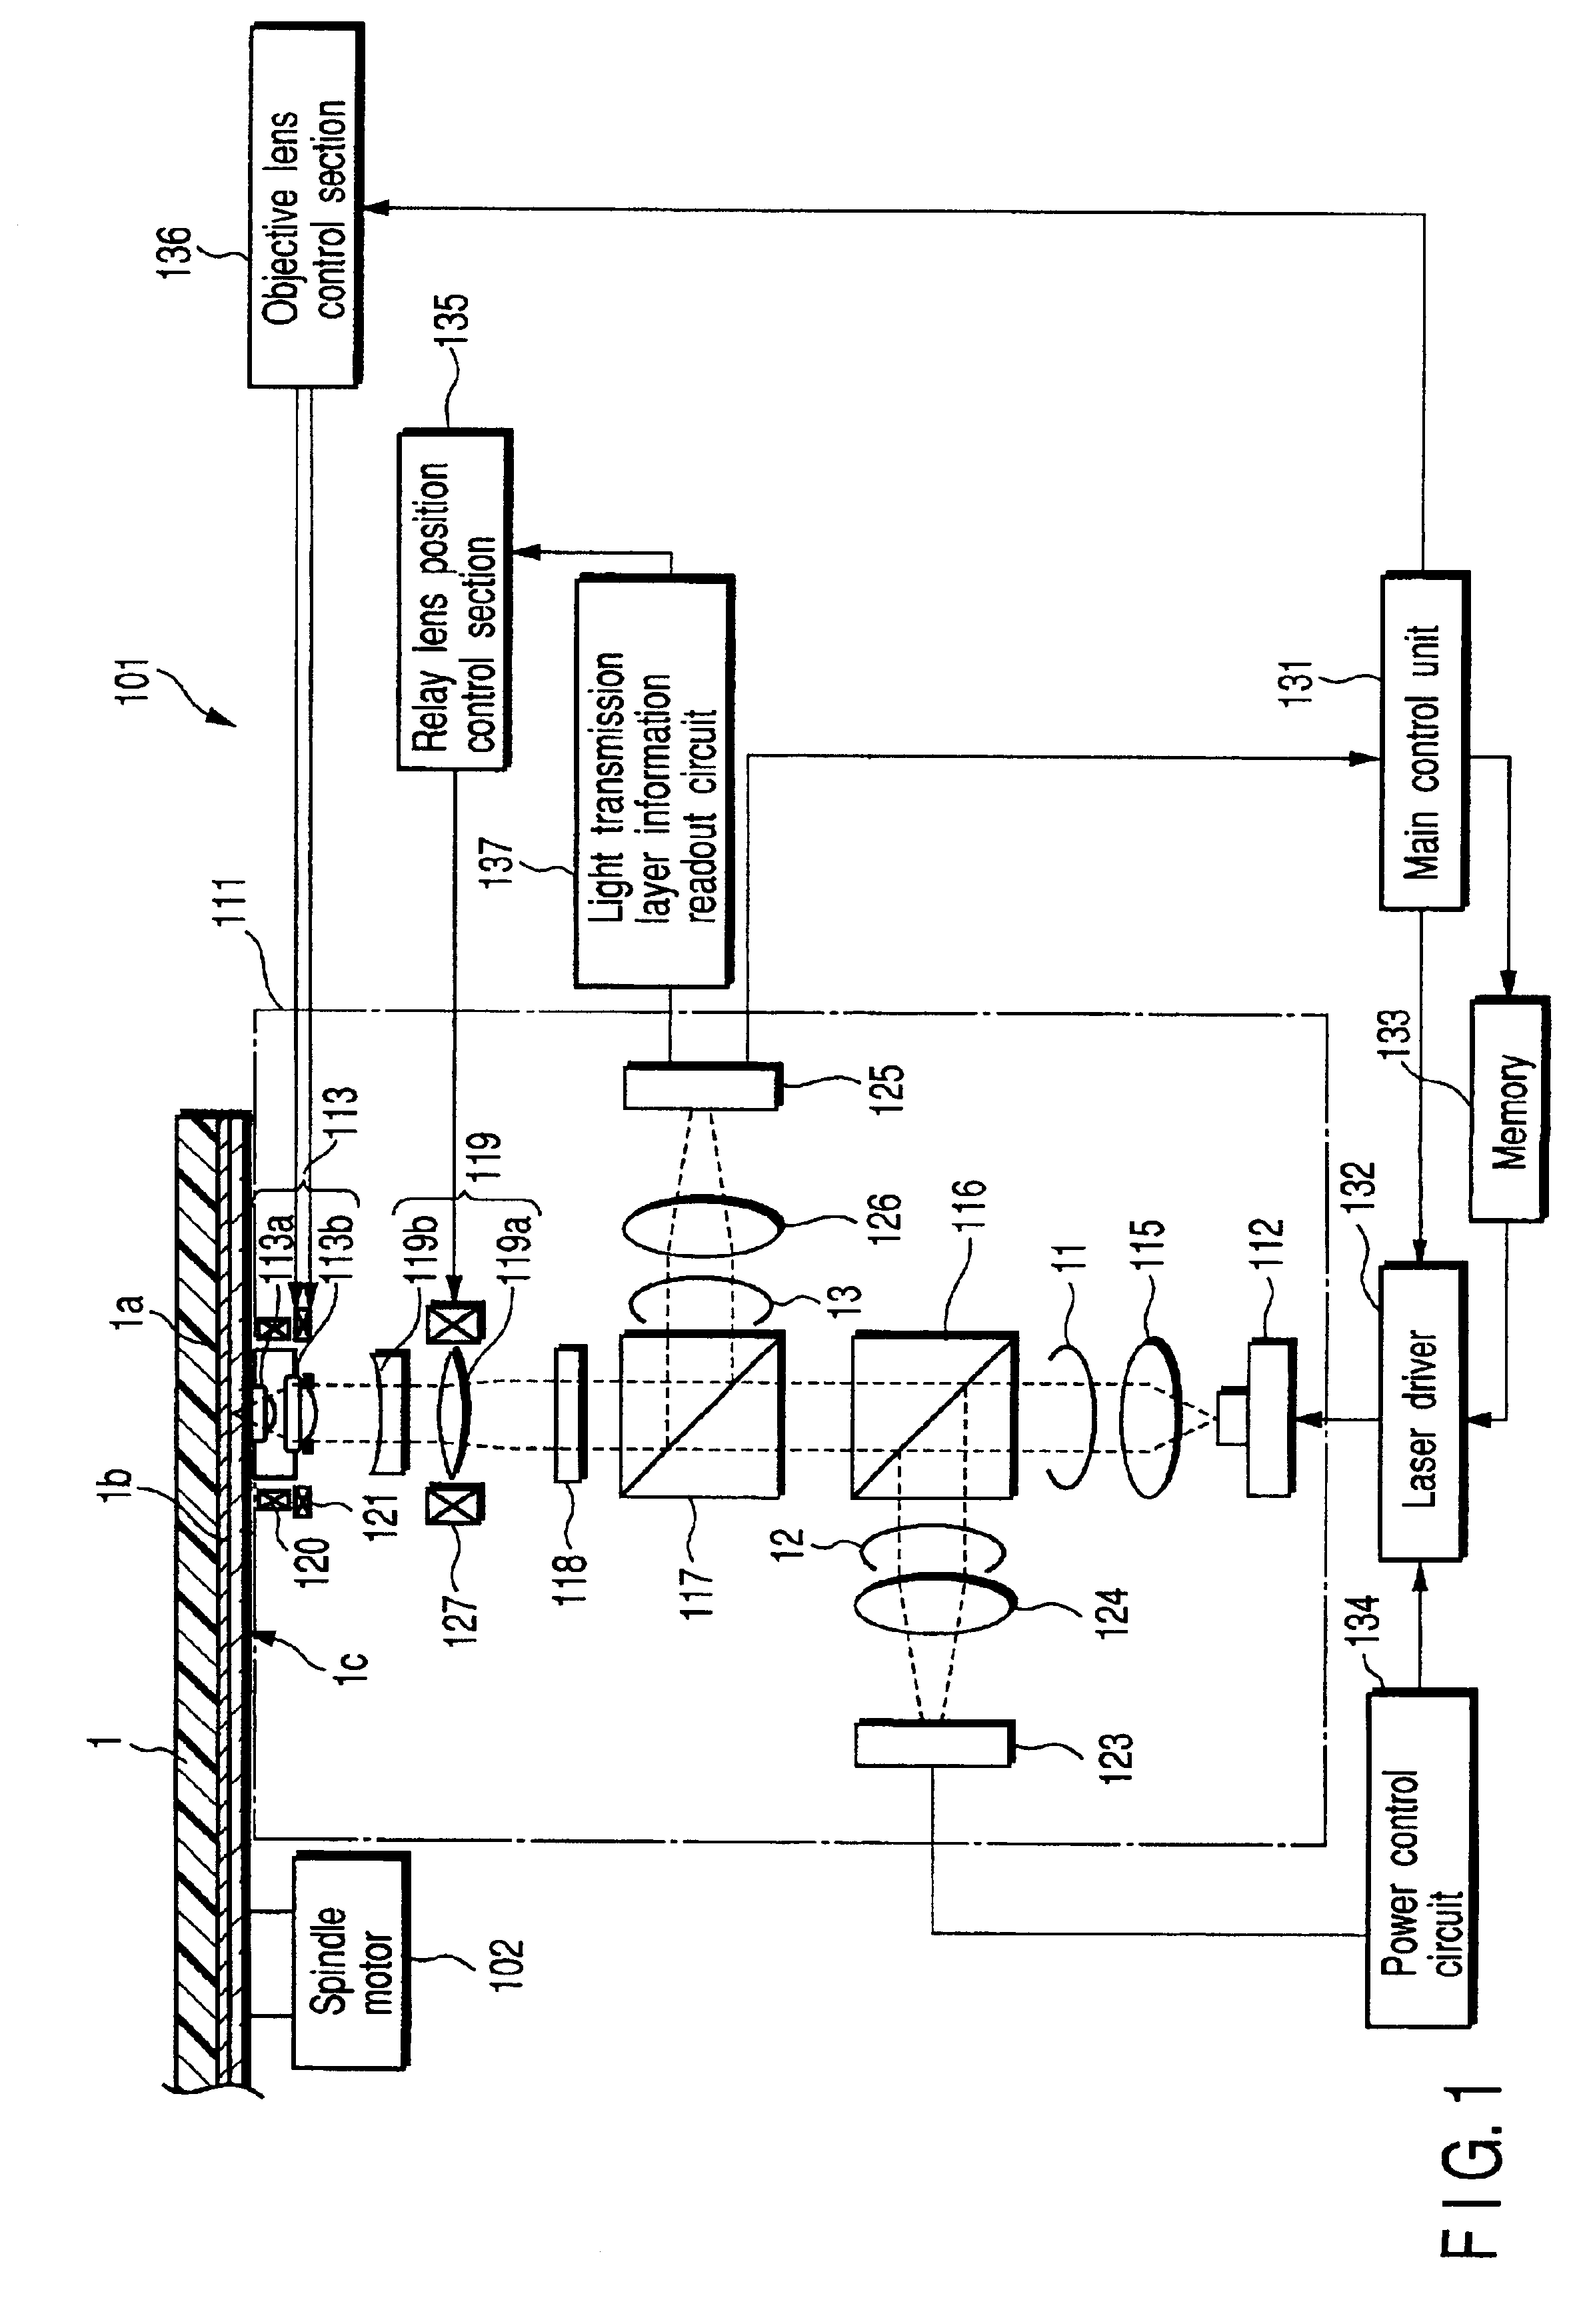 Optical disk unit for recording or reproducing information